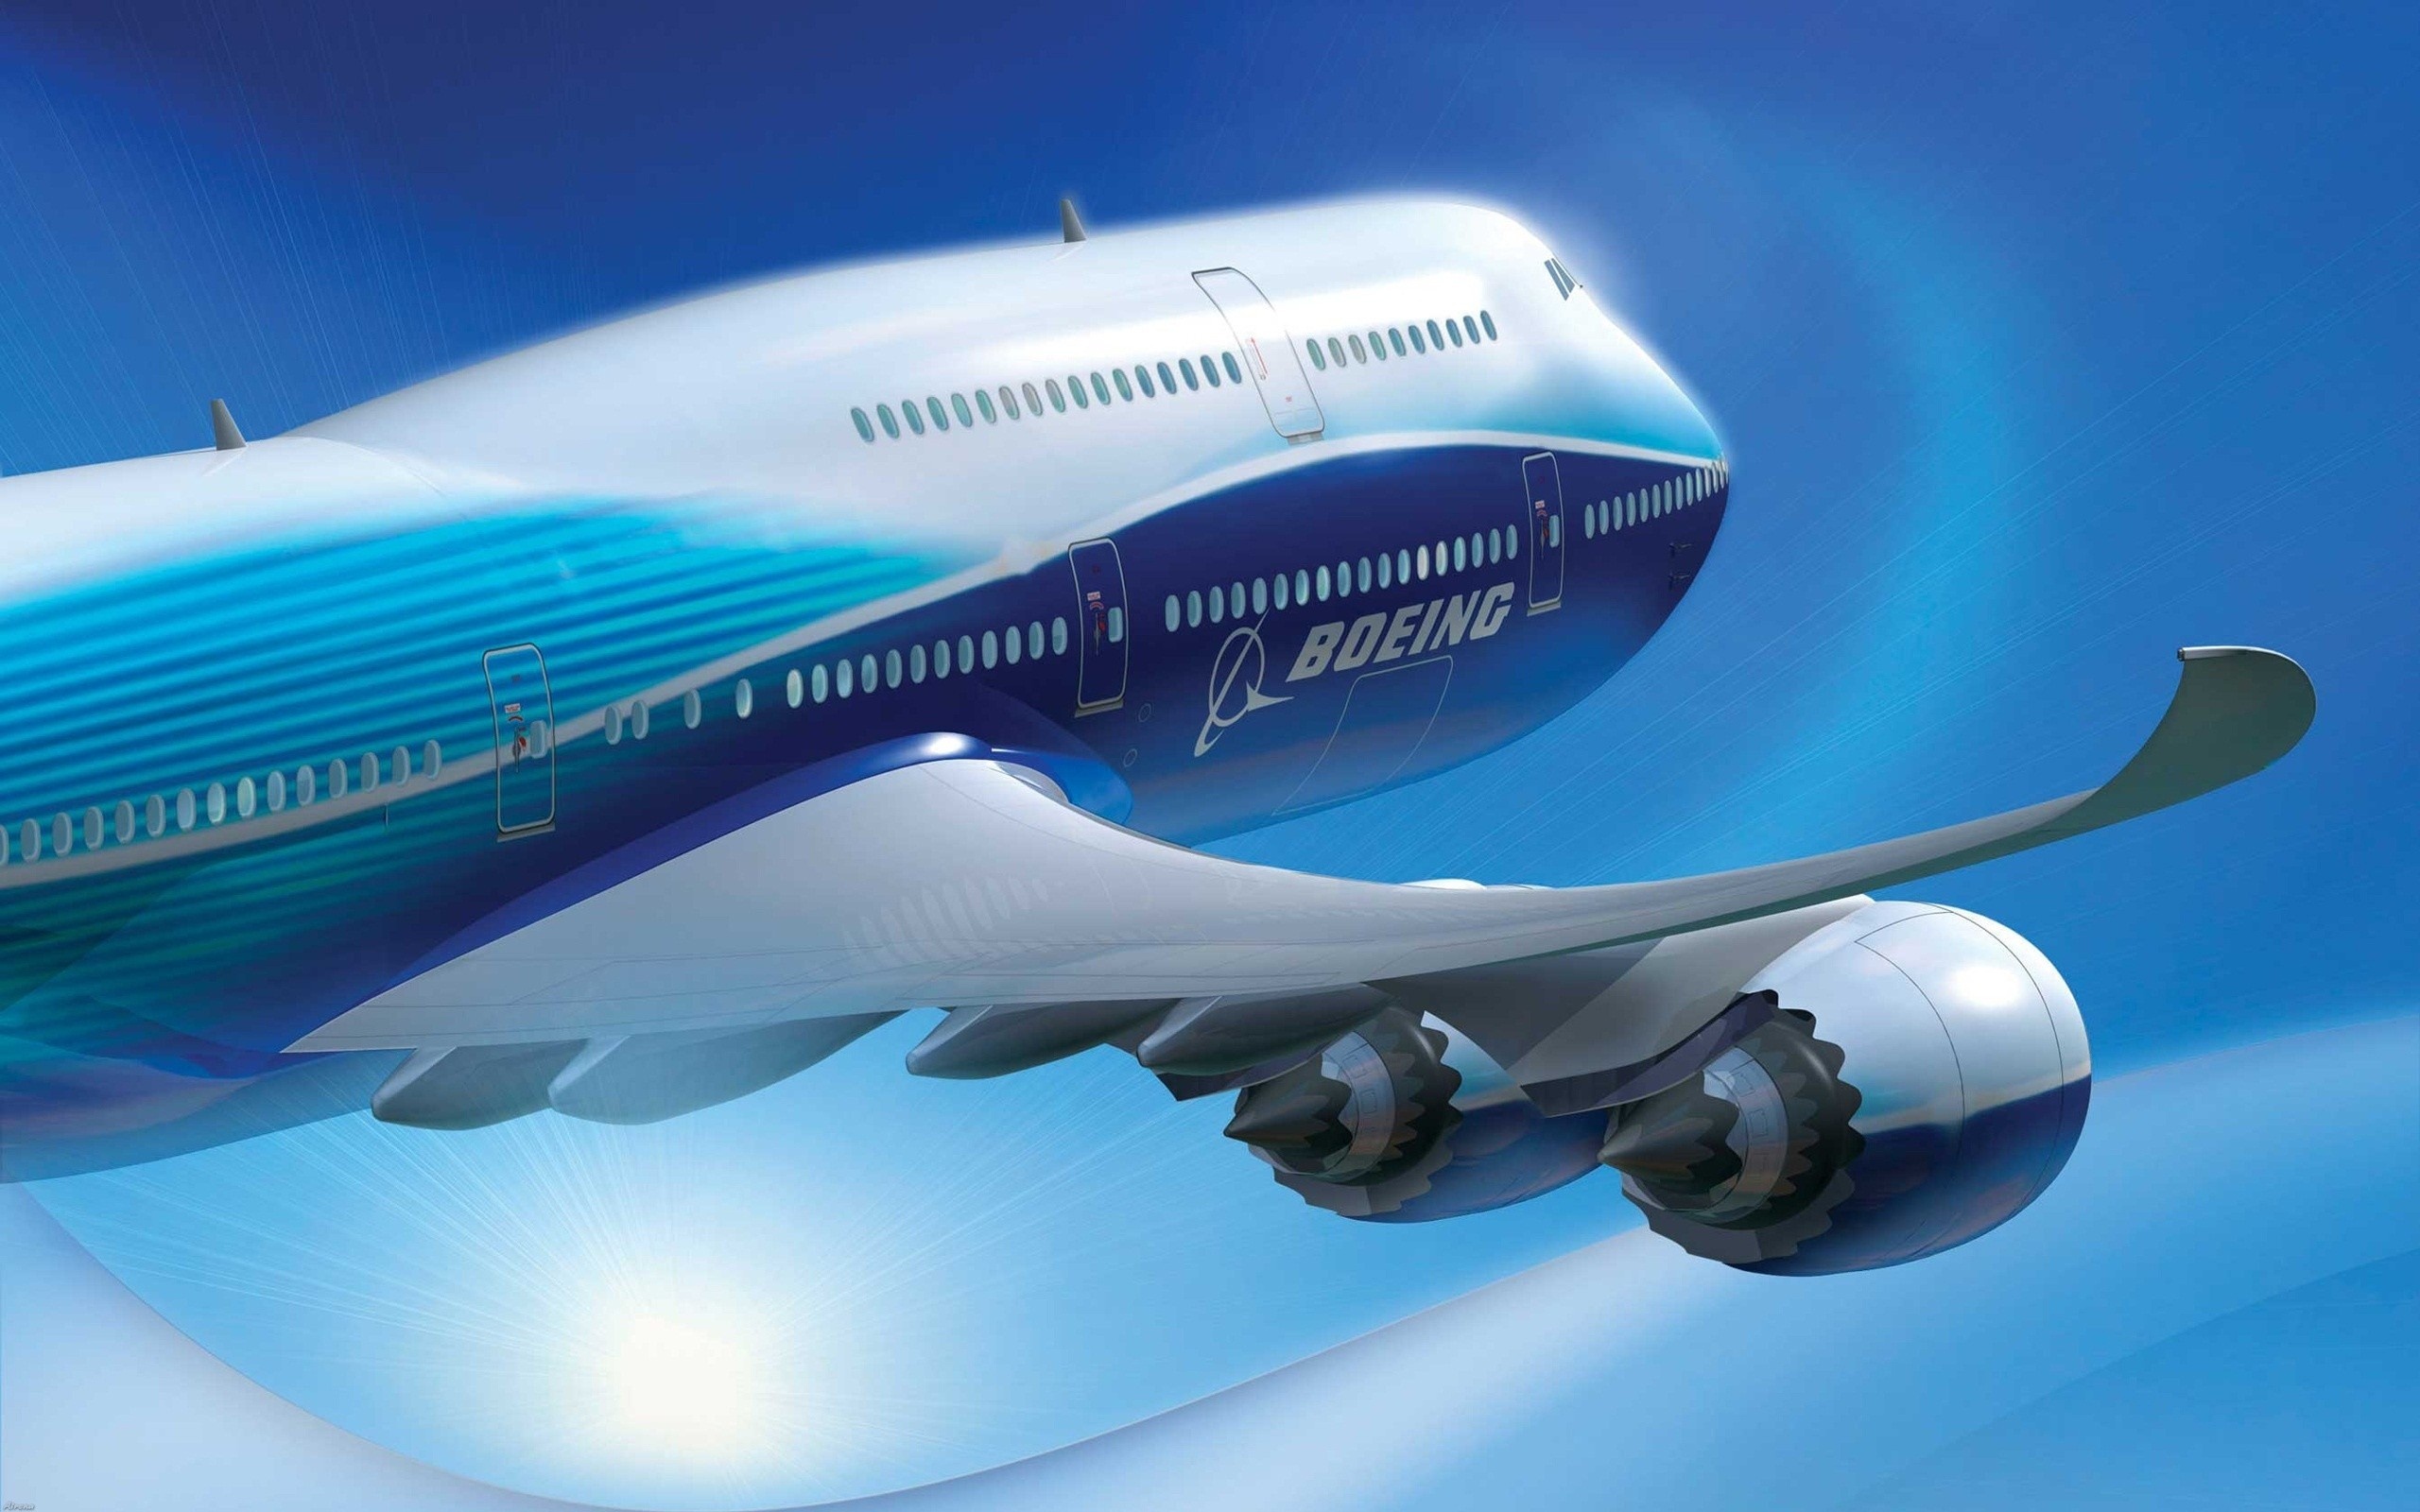 Boeing wallpapers, iPhone backgrounds, collection, Personalize your phone, 2560x1600 HD Desktop